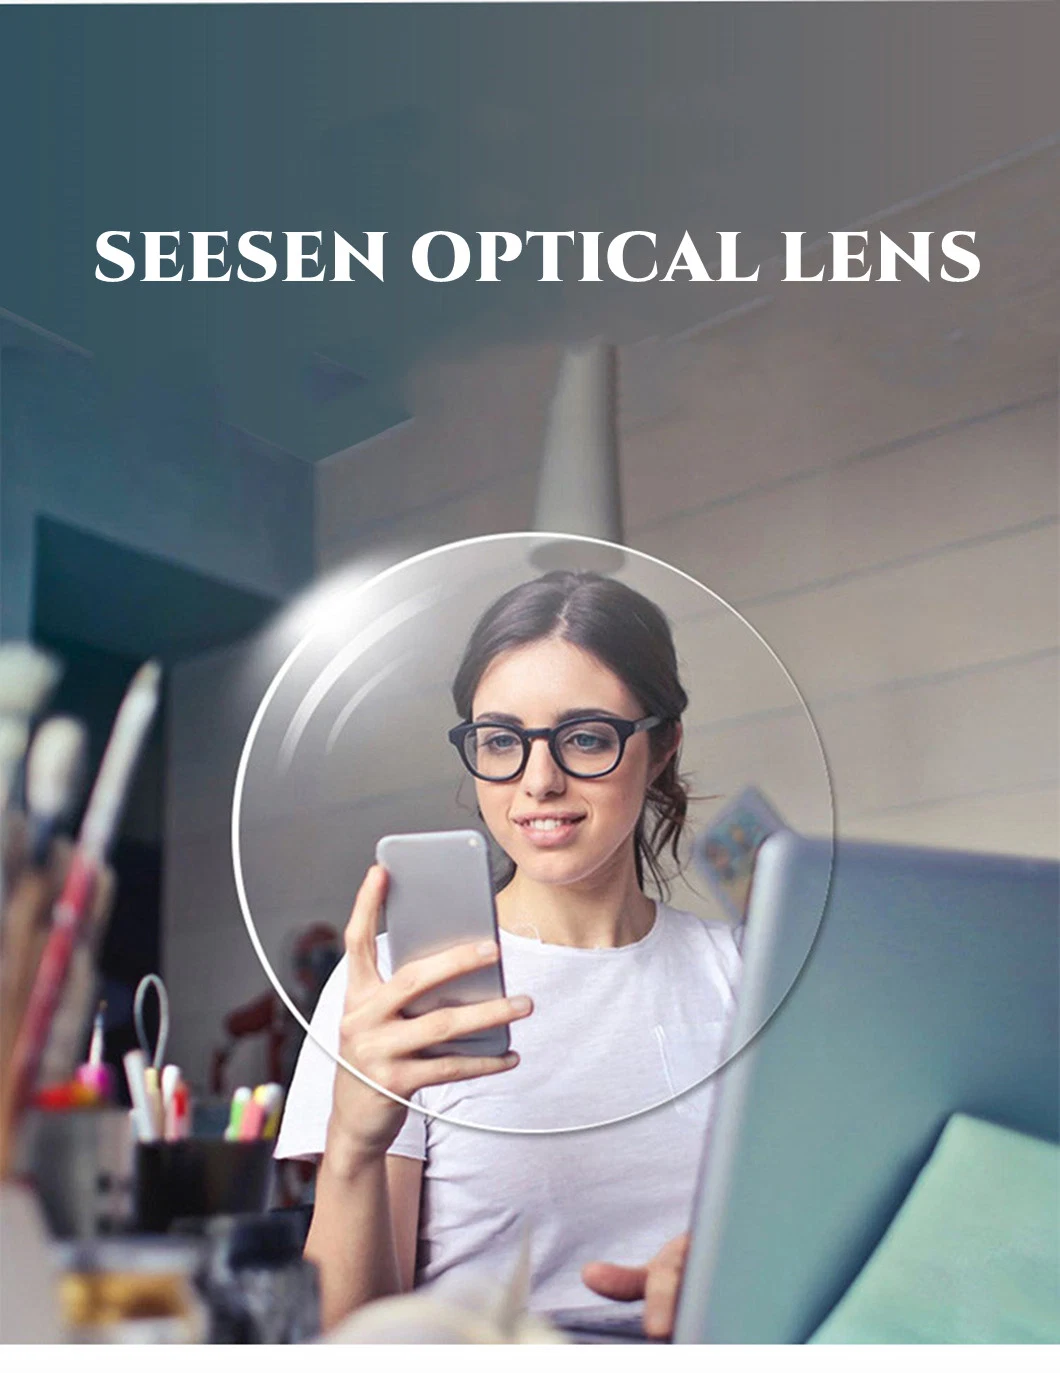 Spectacle Lenses Manufacturers Optical Eyeglasses Lens Cr39 1.499 Round Top Bifocal Lens for Near and Far